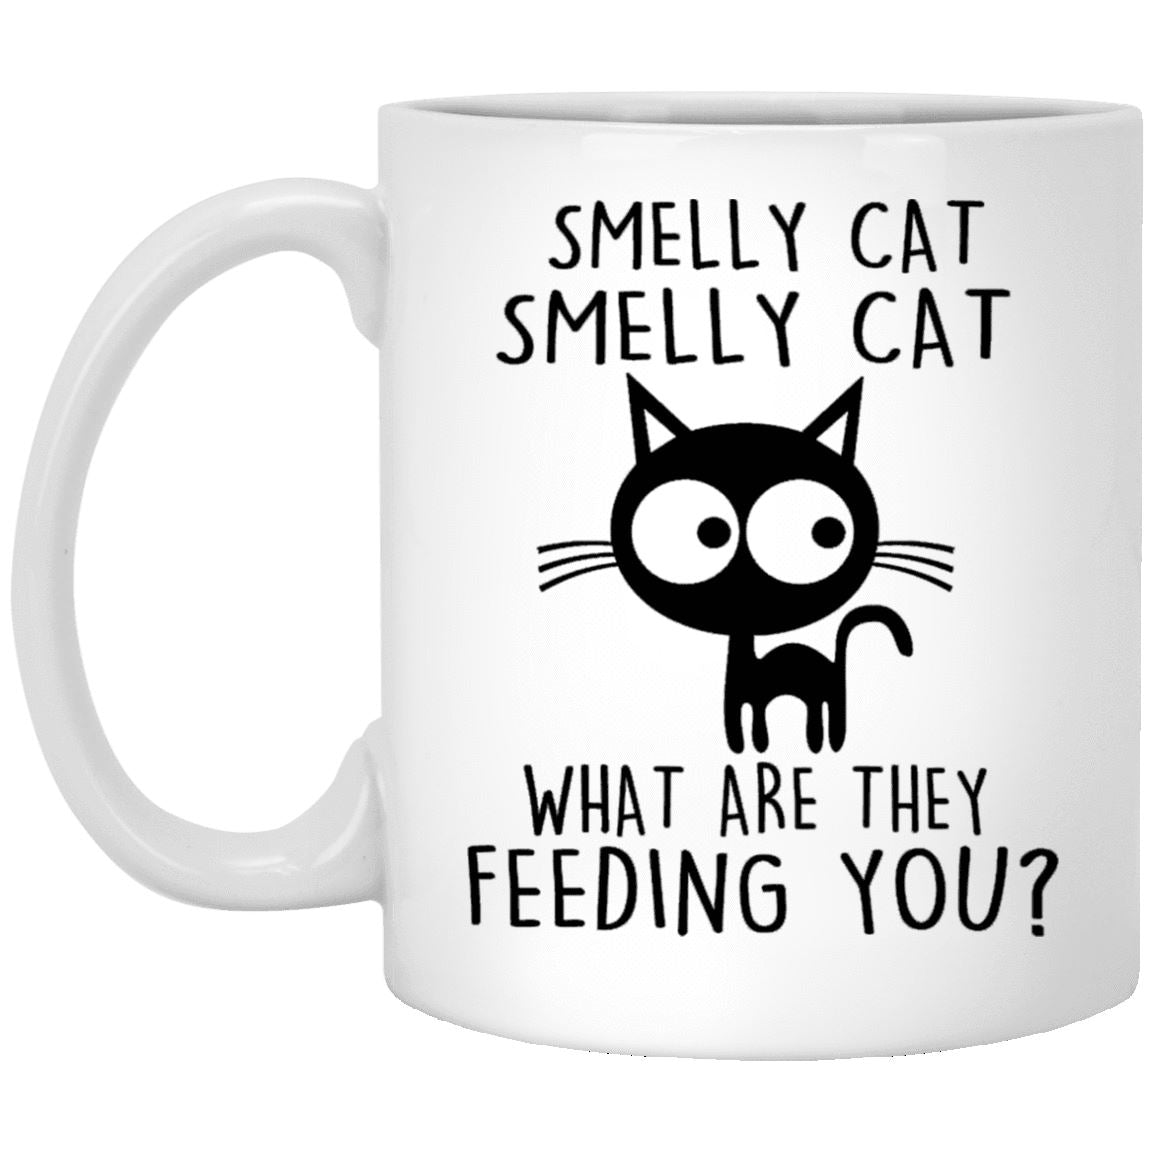 Cat Mug - Smelly Cat What Are They Feeding You - CatsForLife